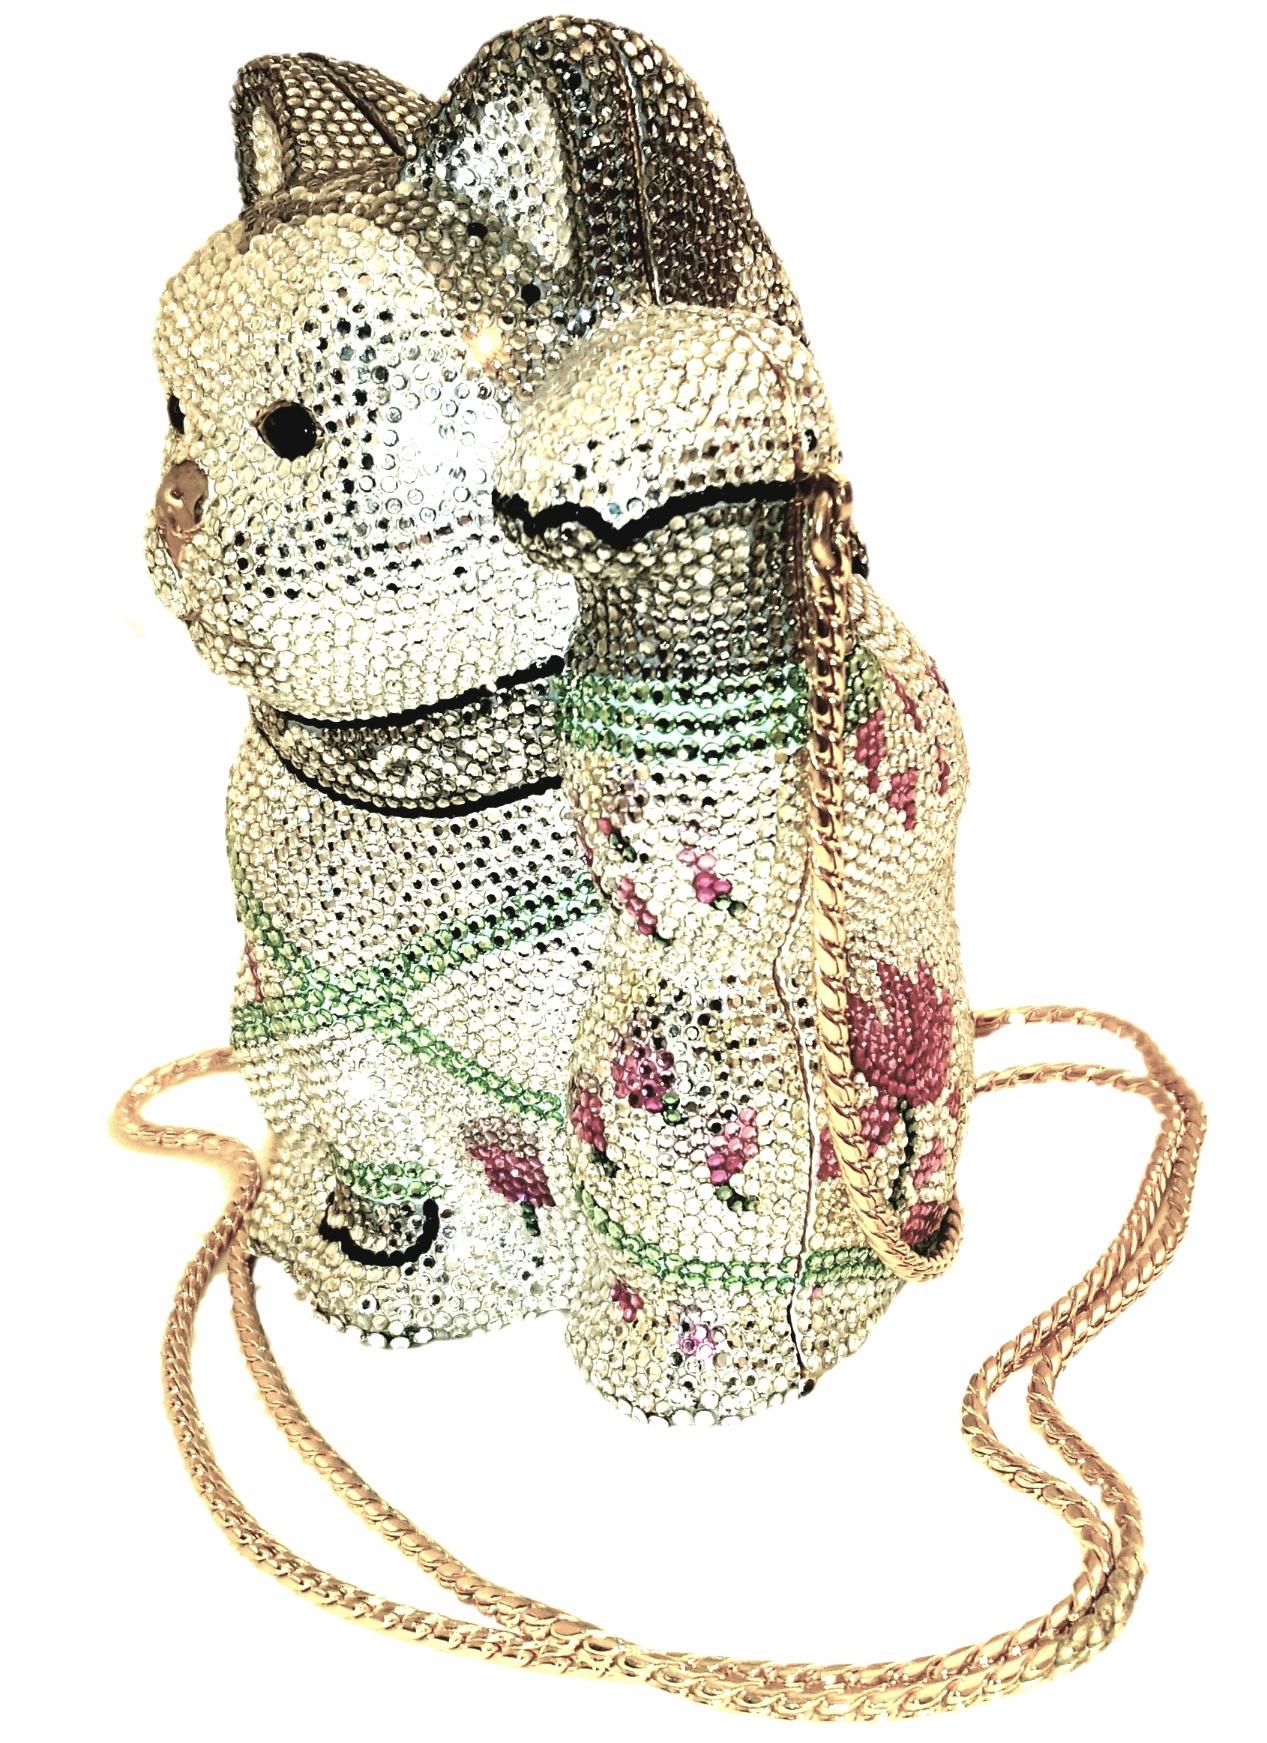 This Judith Leiber clutch replicates the traditional Japanese figurine thought to bring good luck to whomever owns it.  A collector's edition, this minaudière has been crafted in Italy with Austrian clear (silver) crystals creating a glistening